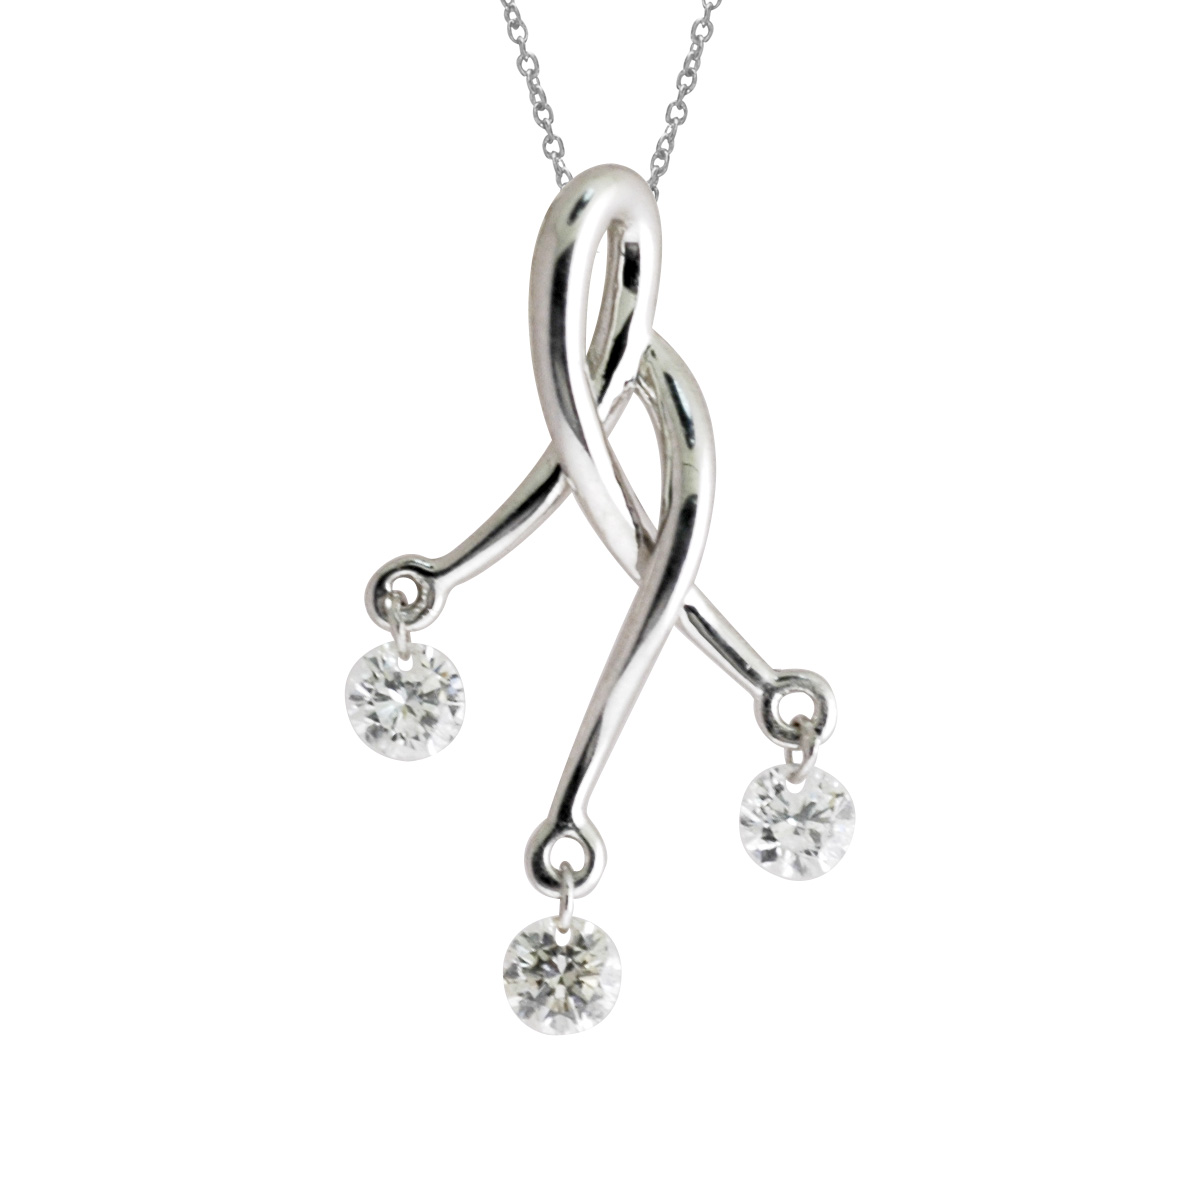 JCX2858: 14k gold Dashinng Diamonds pendant with 0.24 total ct diamonds. The center dangling diamond dances and shimmers with every heartbeat.